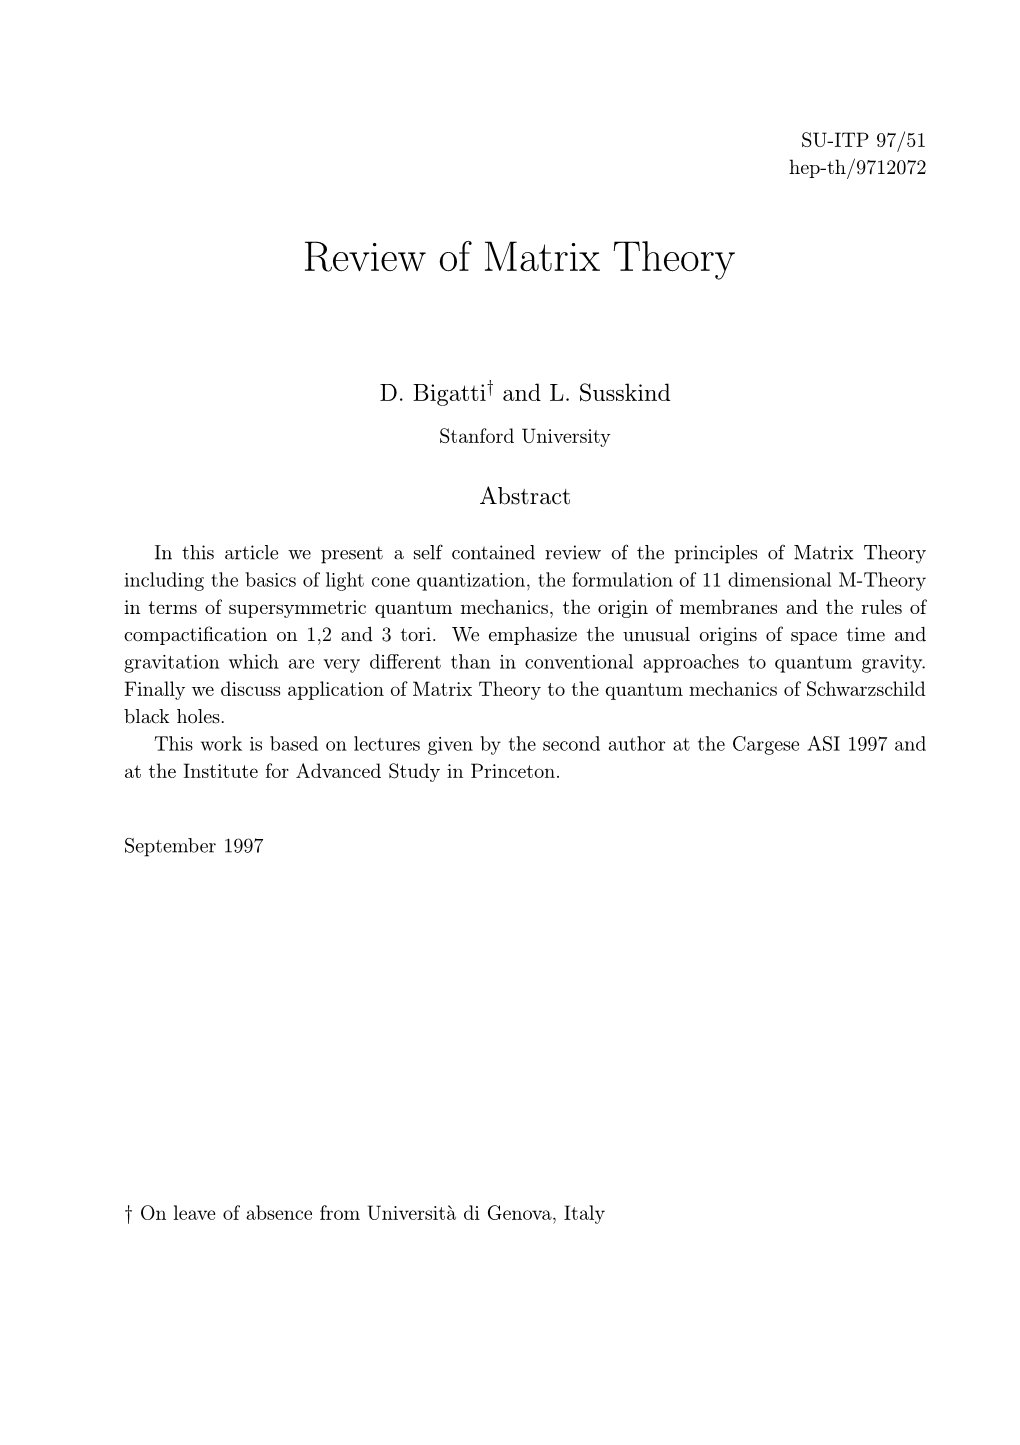 Review of Matrix Theory